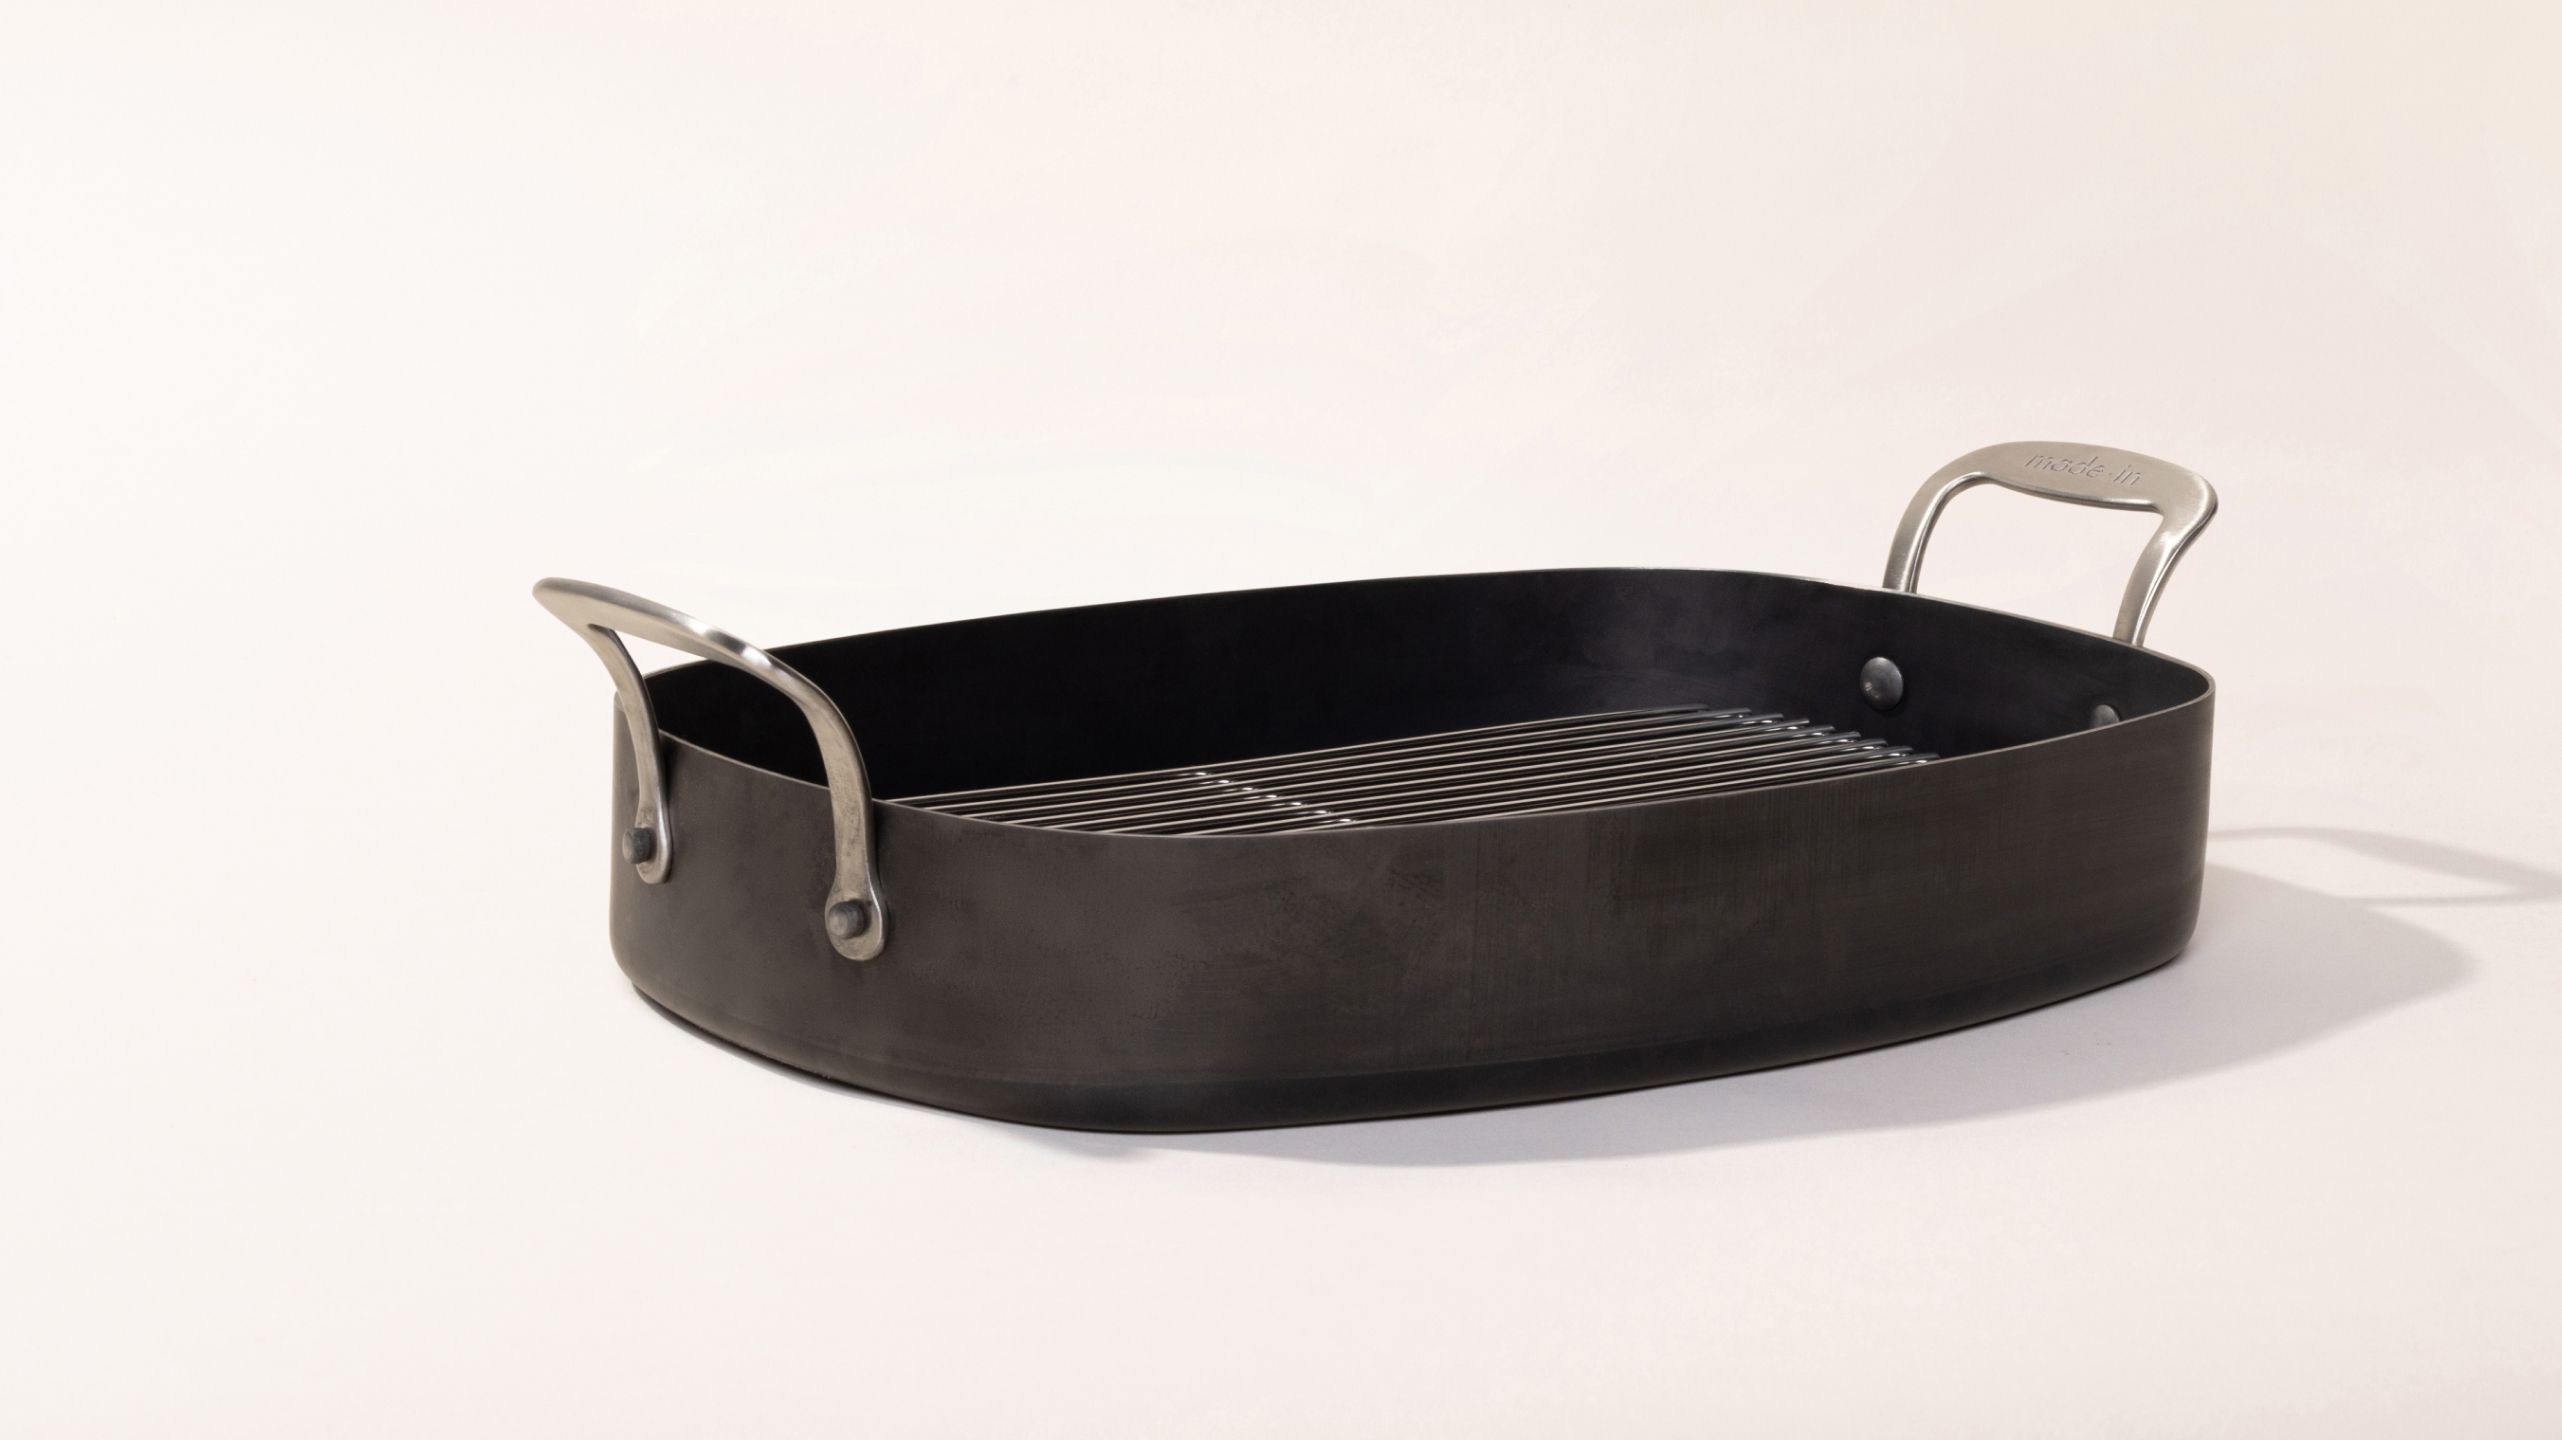 9 x 13 Roasting Pan with Rack and Lid - CHEFMADE official store